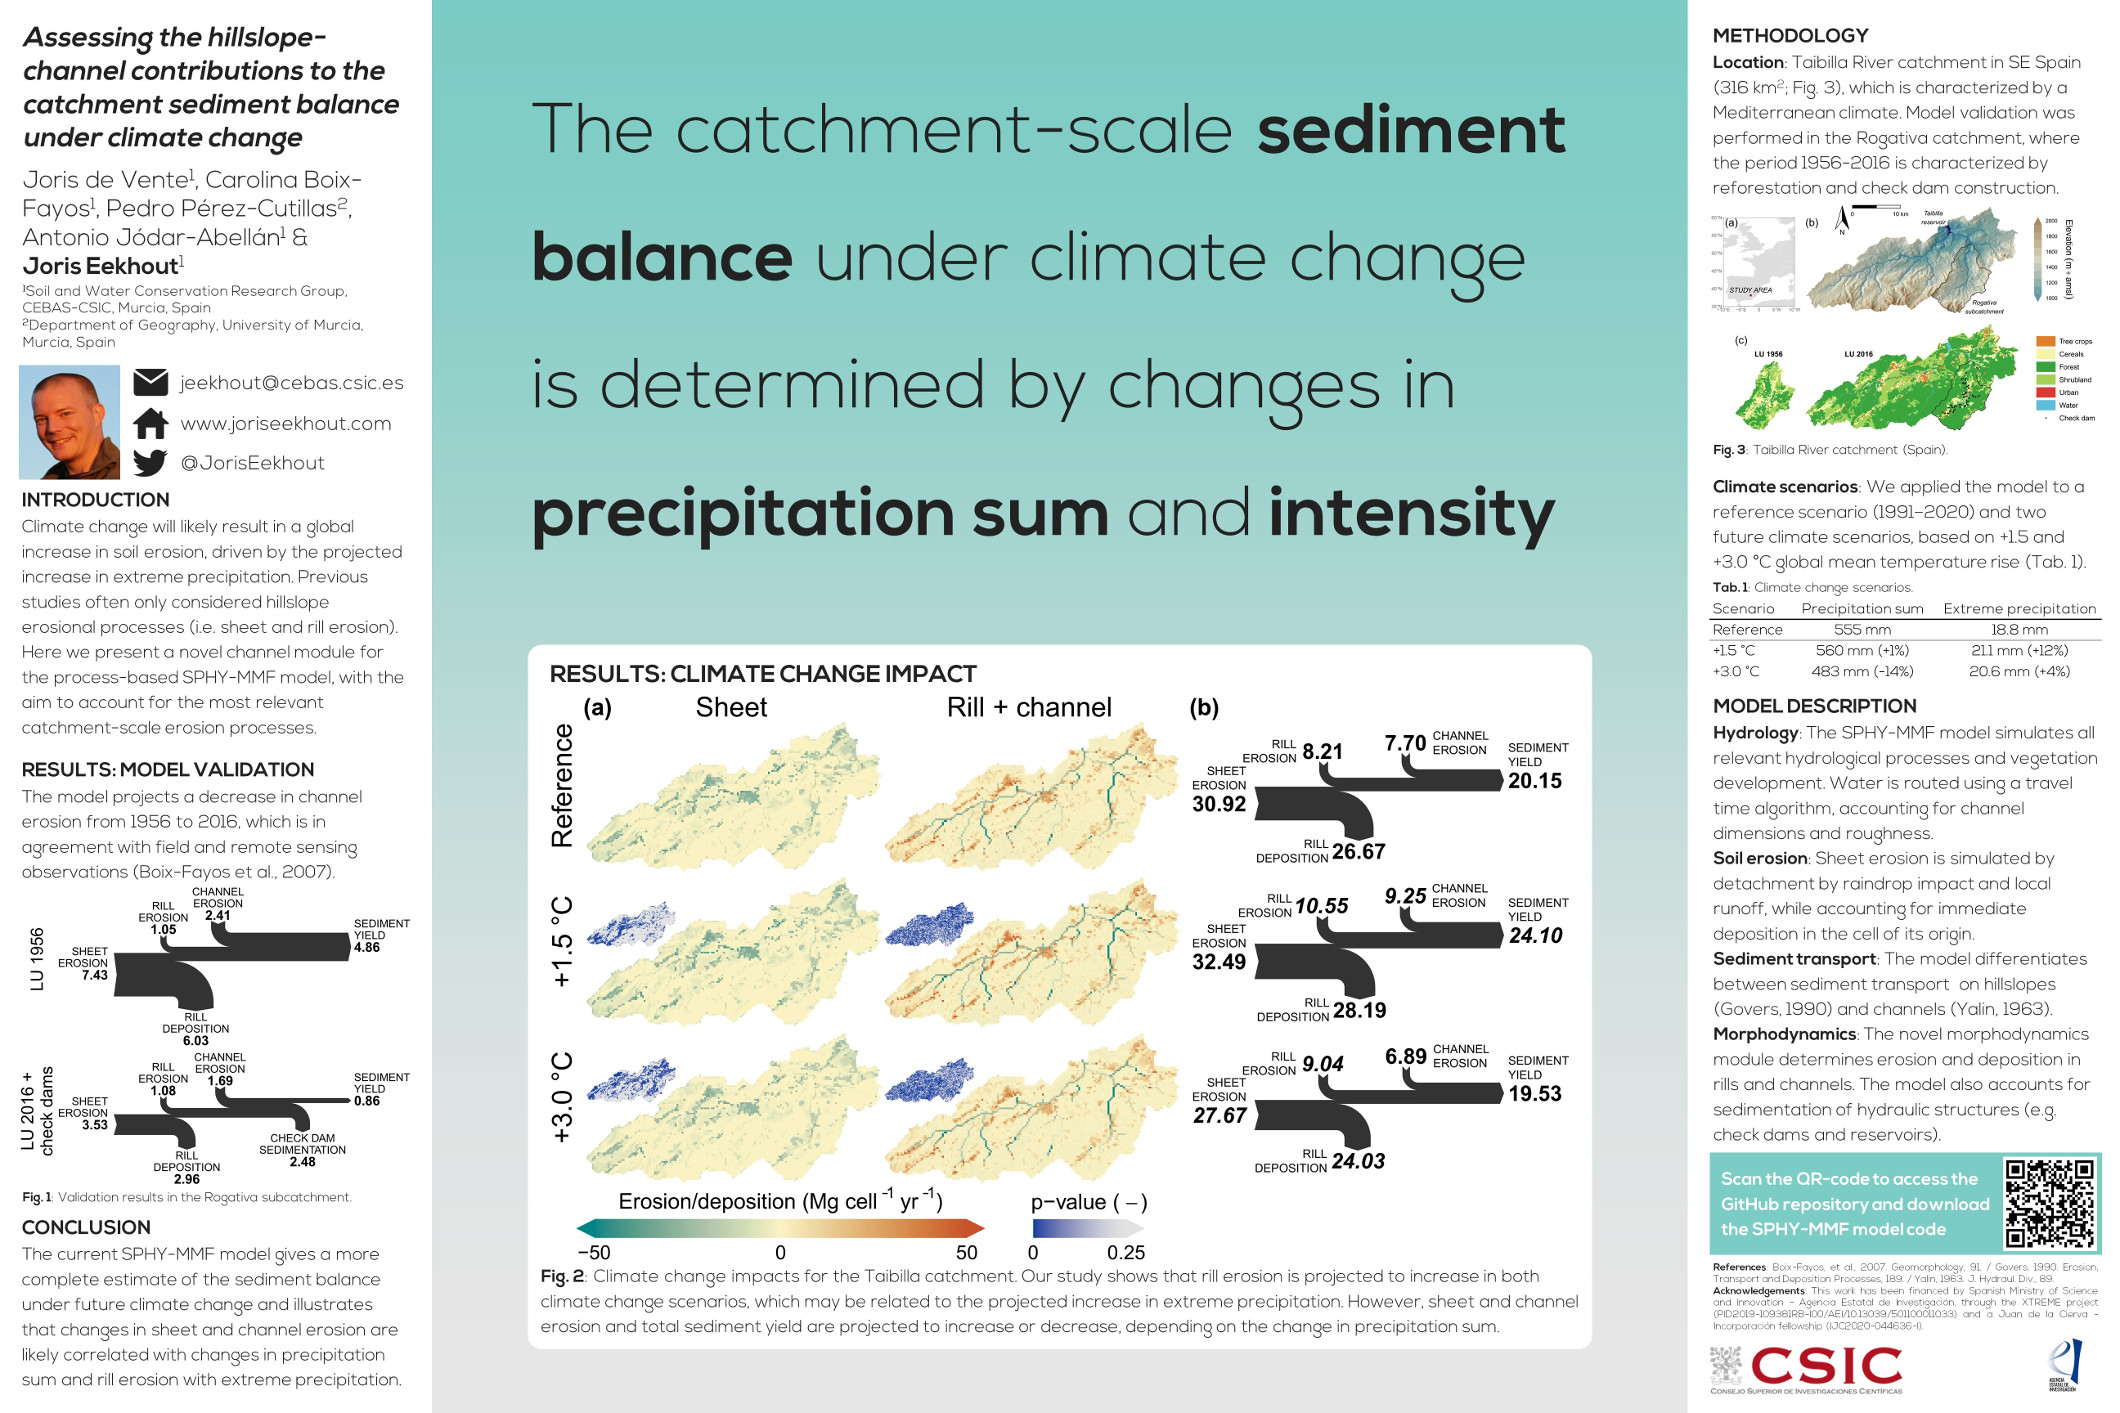 Assessing the hillslope-channel contributions to the catchment sediment balance under climate change